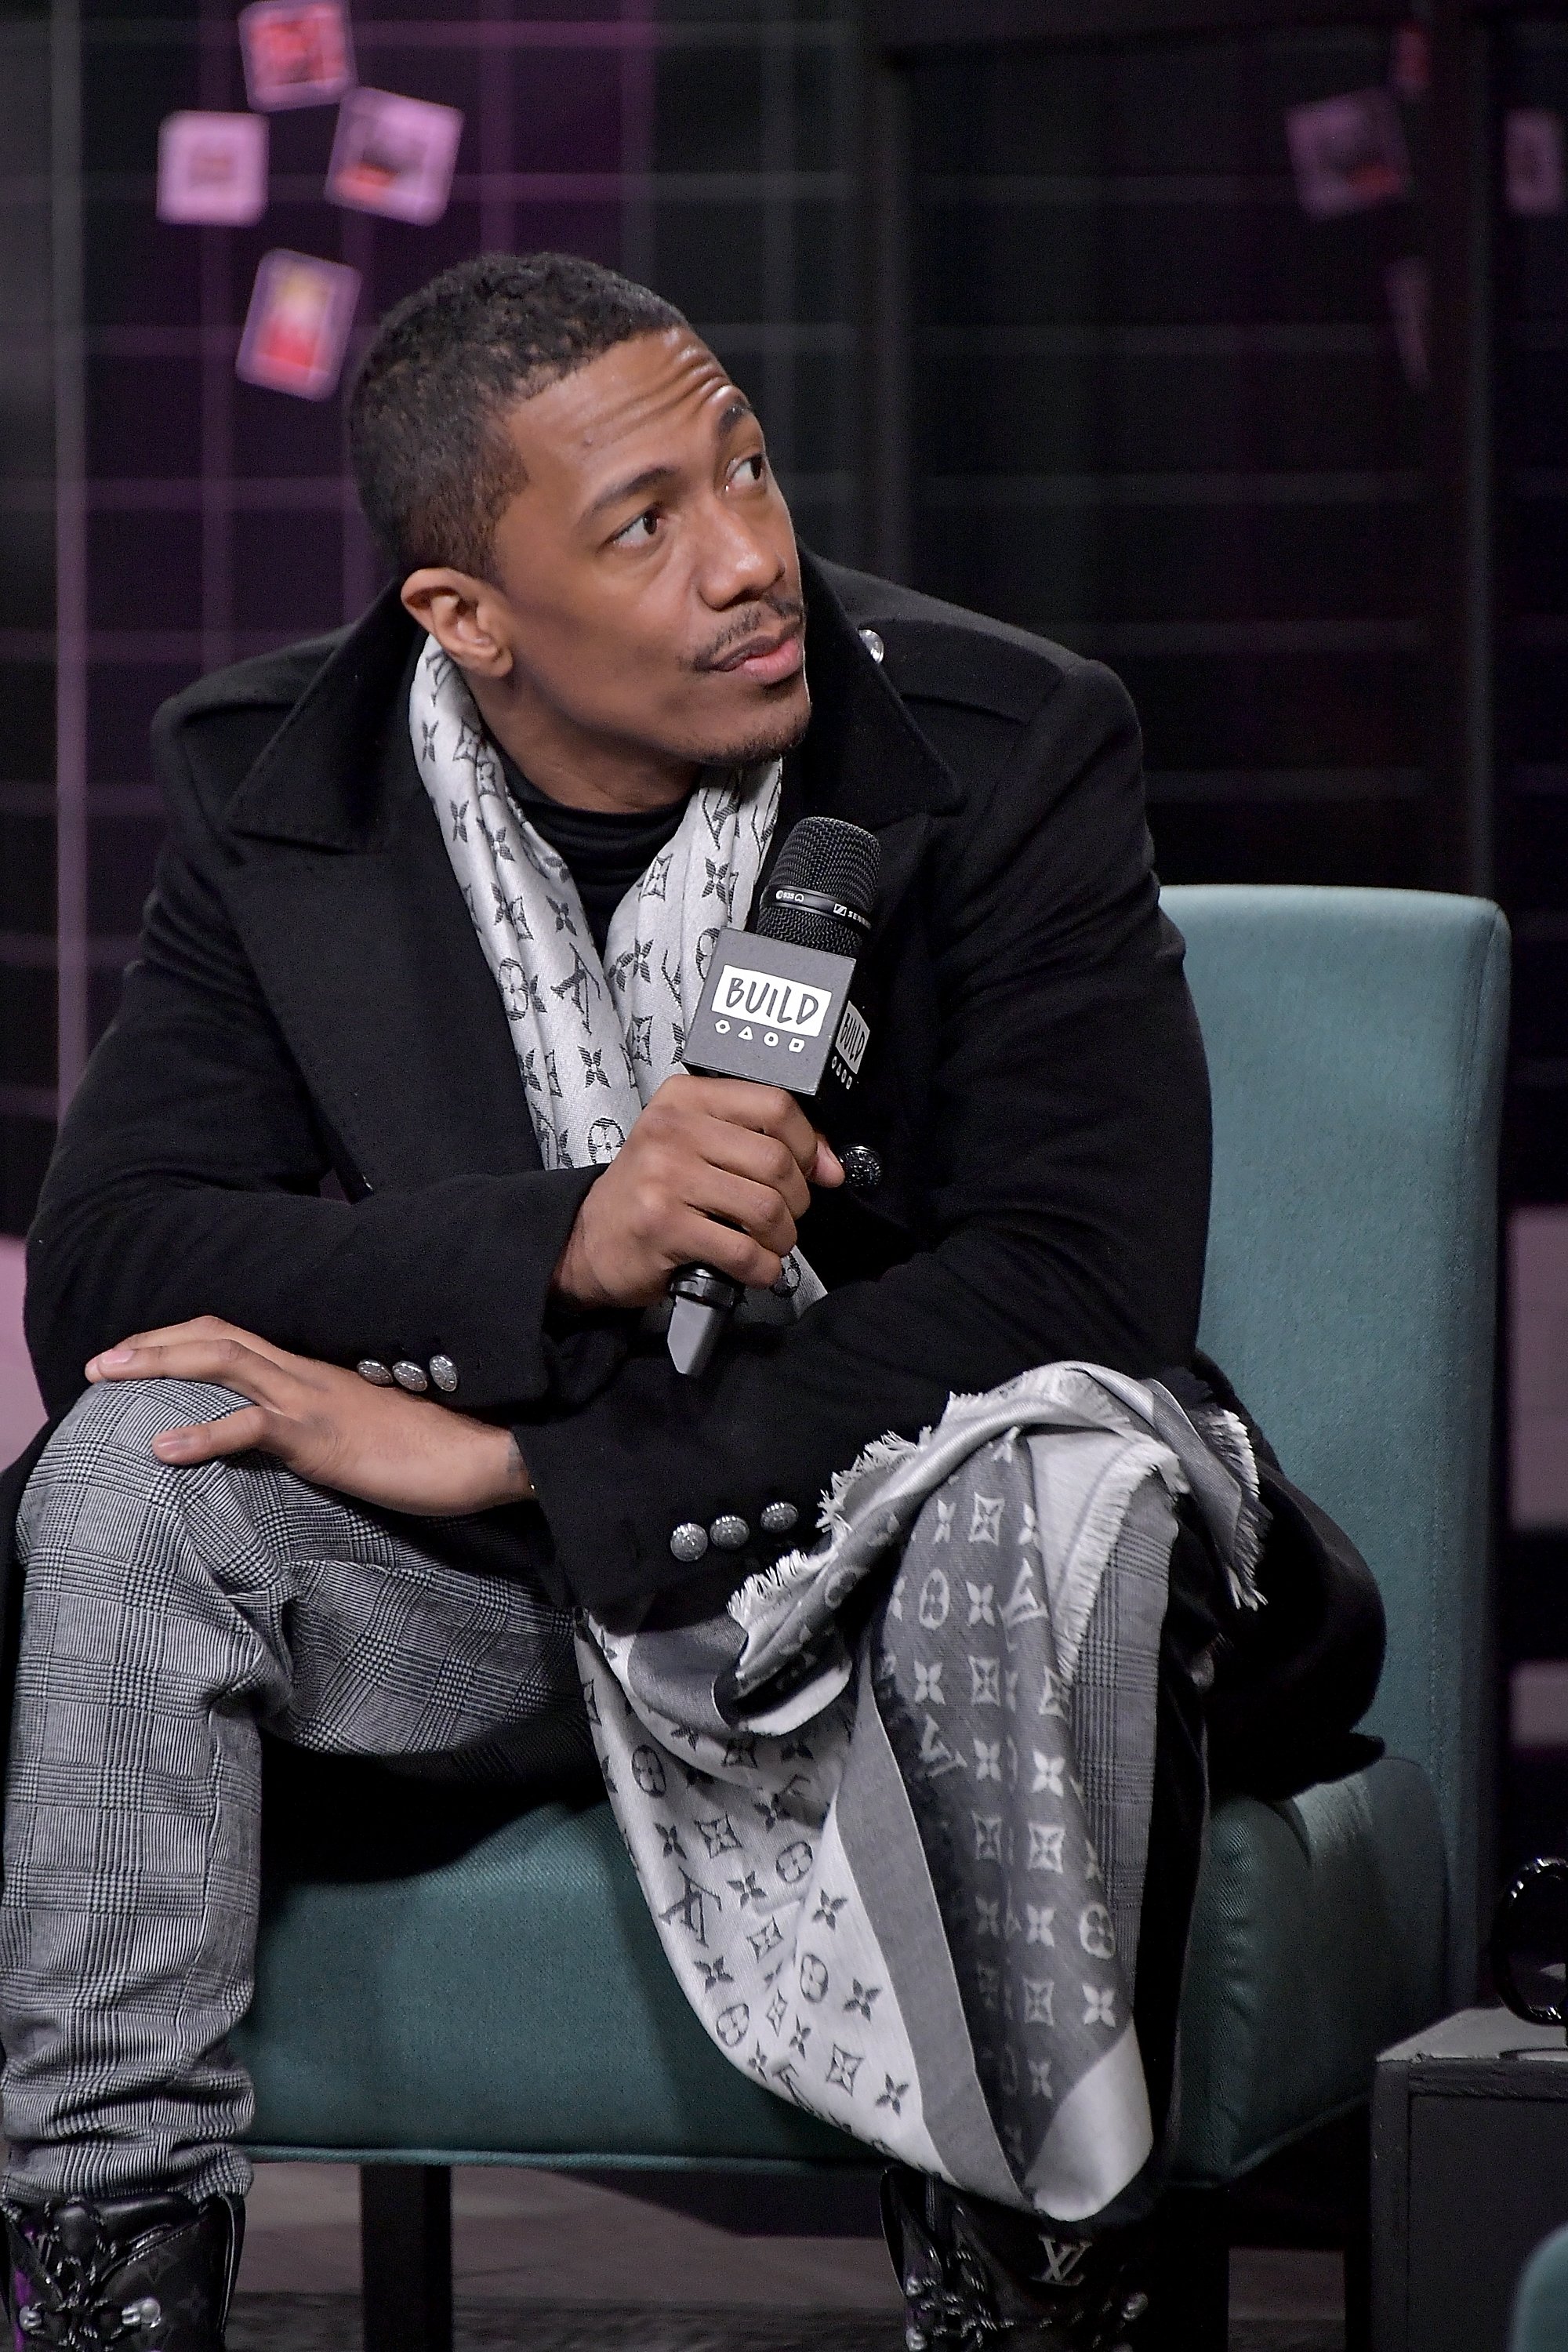 Nick Cannon visits Build to discuss the reality TV show "The Masked Singer" at Build Studio on December 11, 2018  | Photo: GettyImages